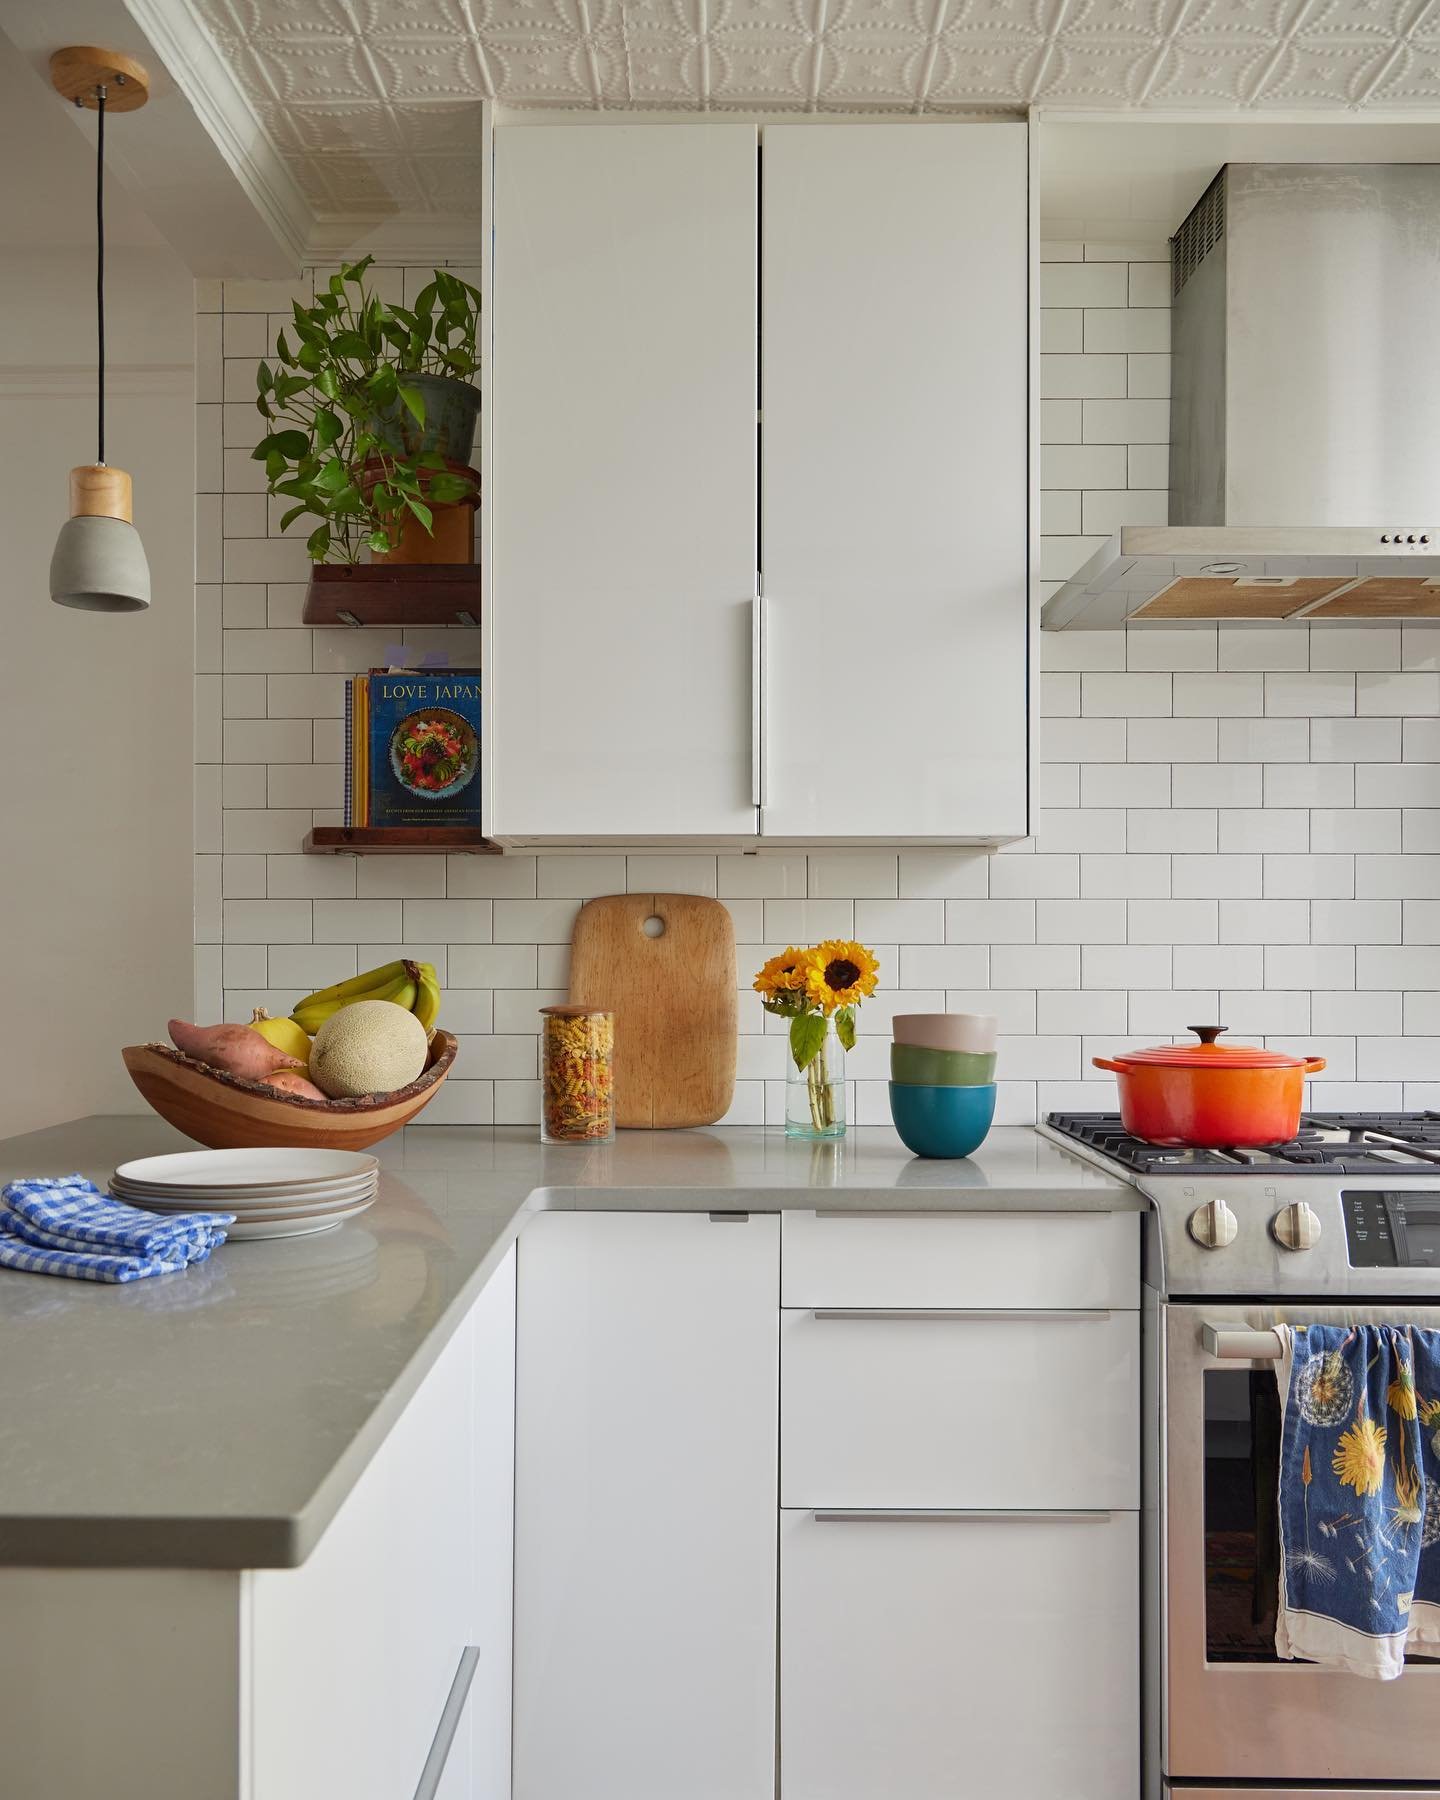 Where we spend all our time - the kitchen. At first I was turned off by the Ikea kitchen renovation the previous owners did, but then quickly saw how functional and blank slate it was. A few personal touches, color of course, and it became our own. I